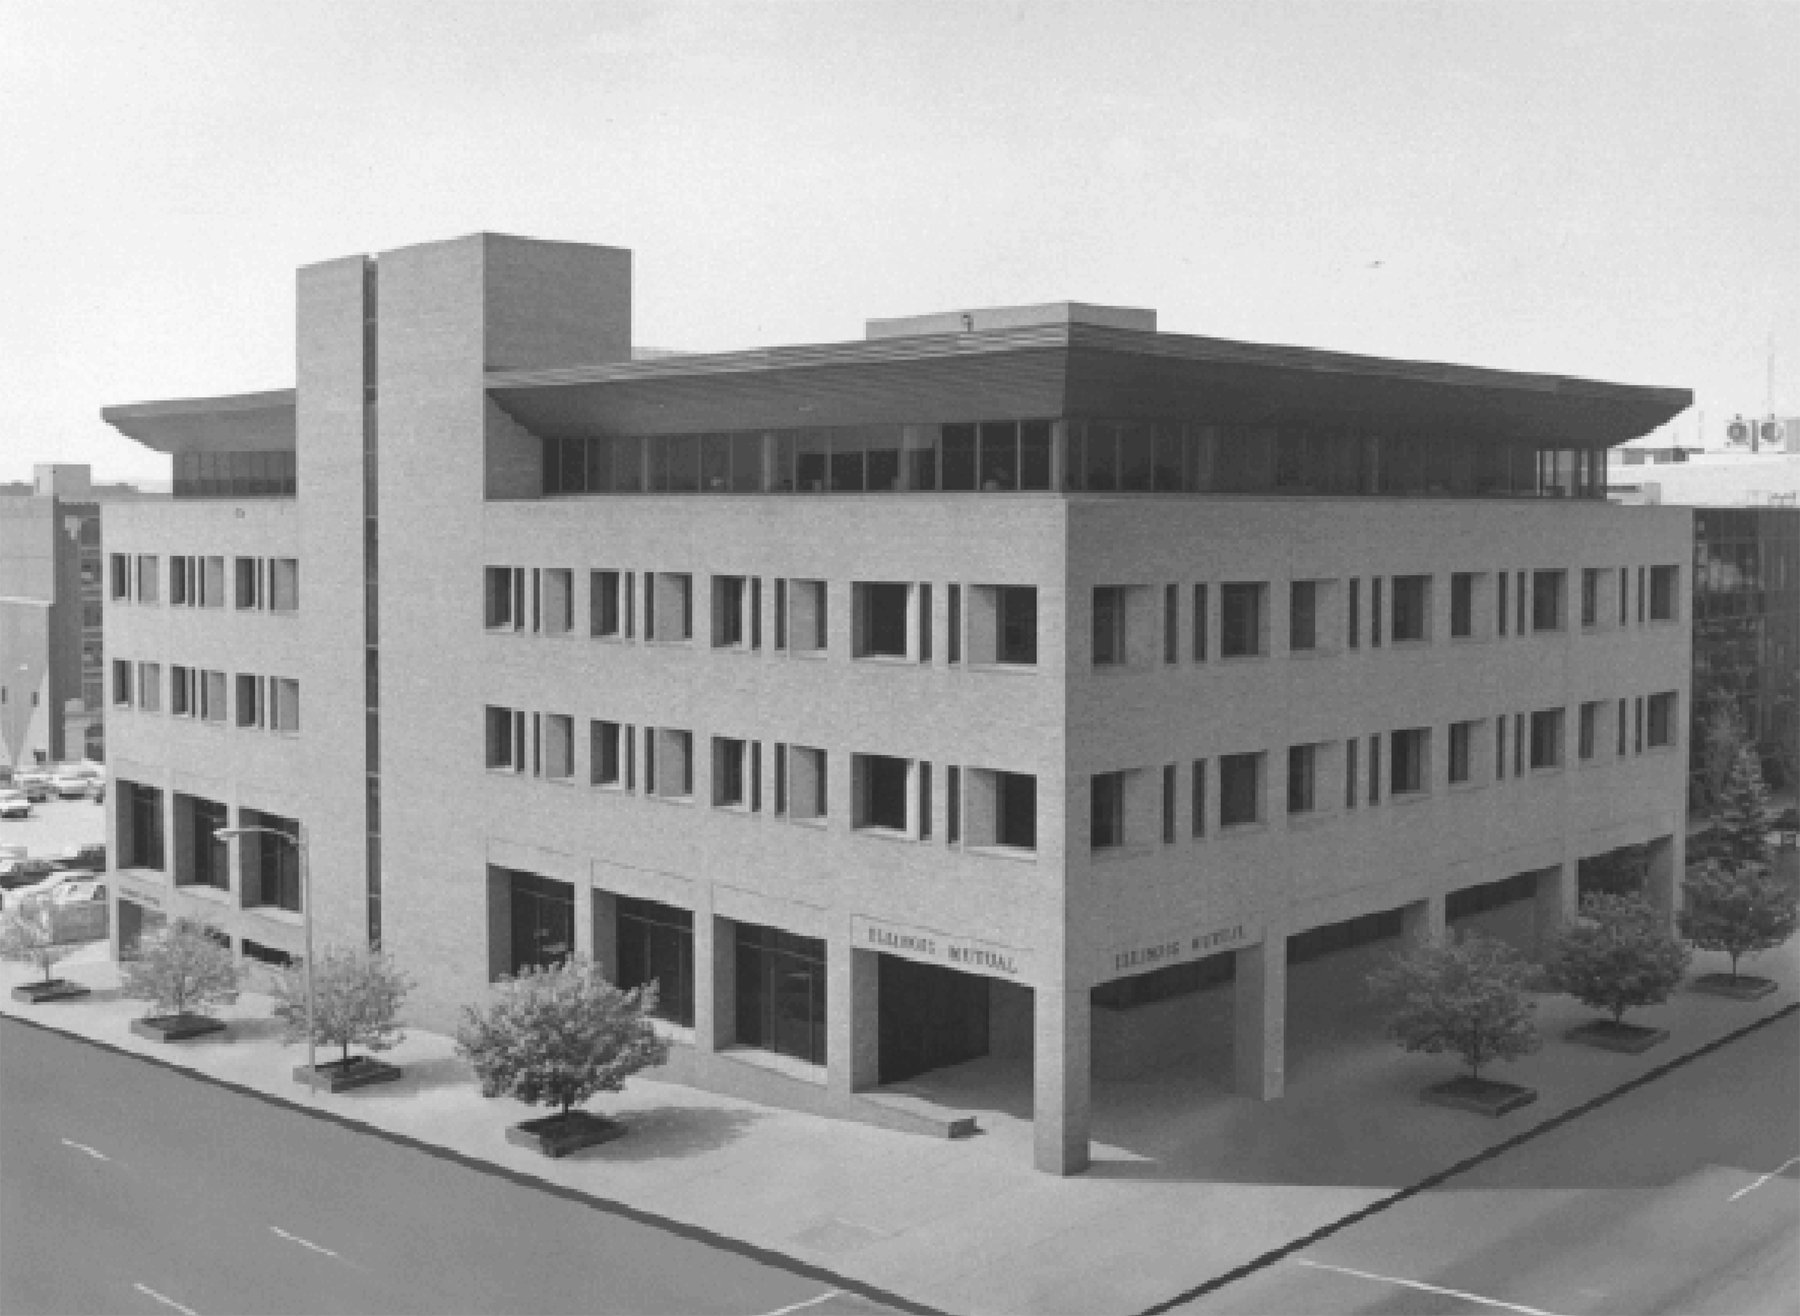 The home office building of Illinois Mutual in Peoria, Illinois.